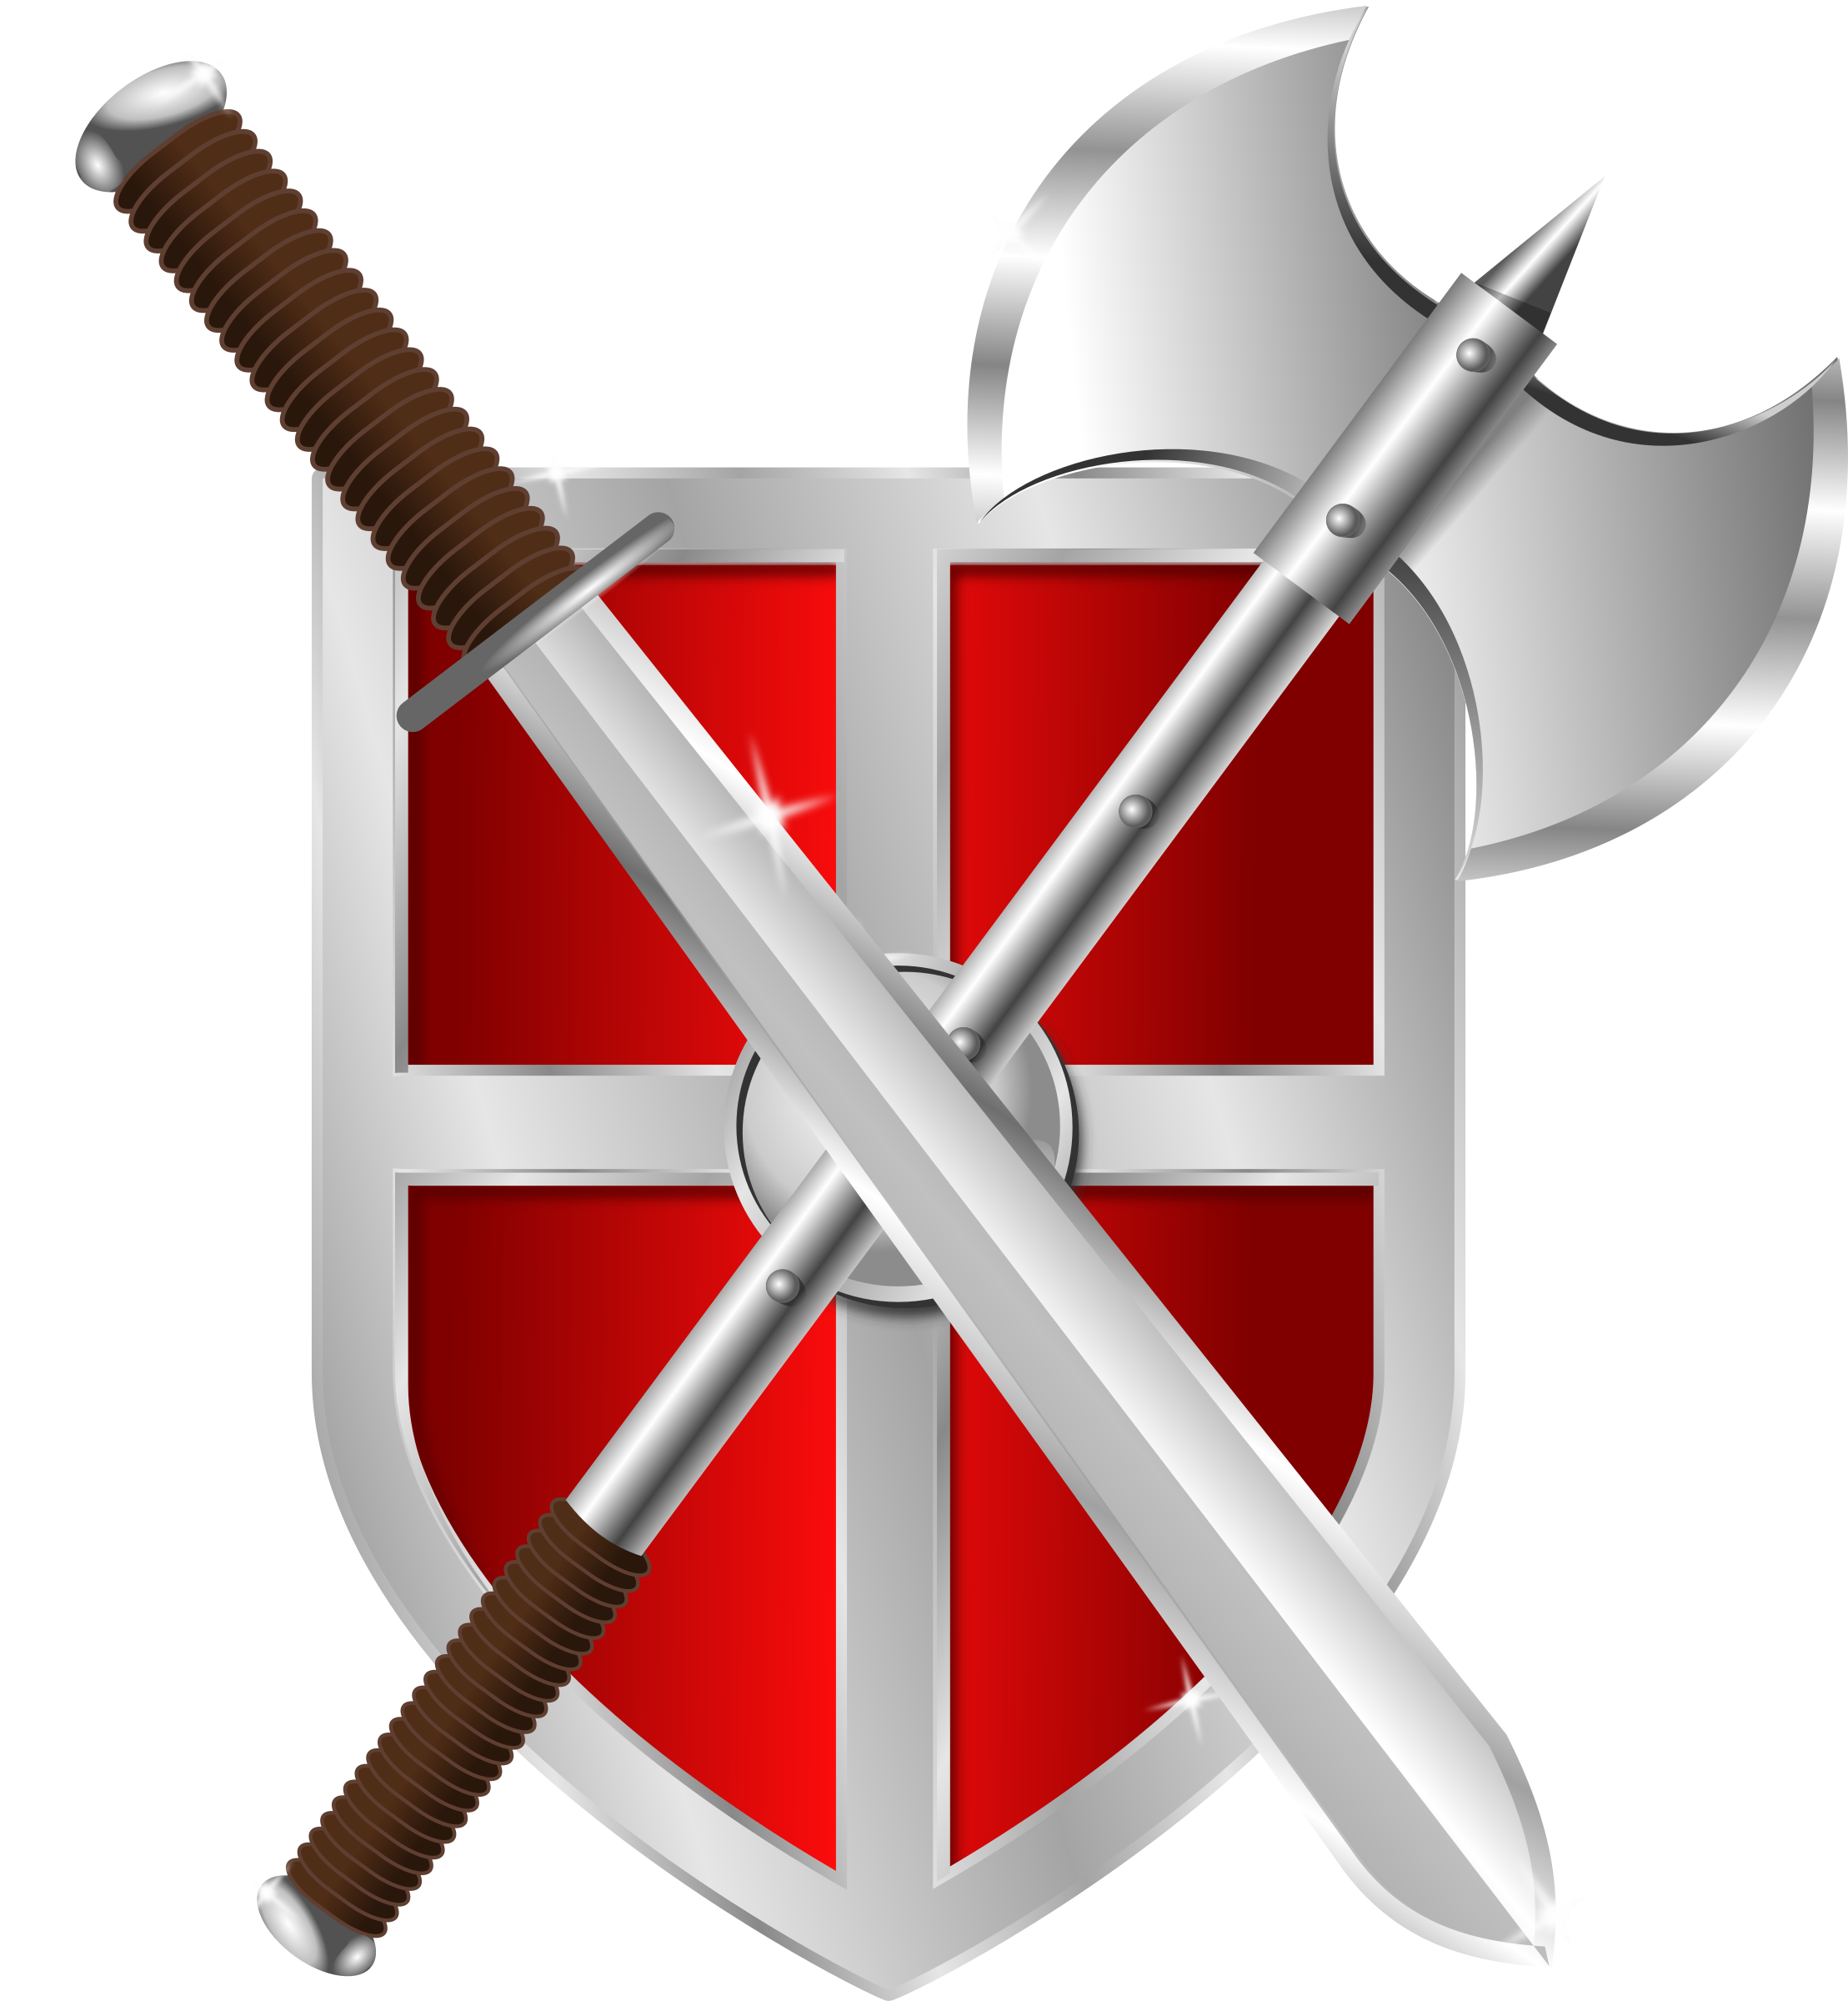 red shield with sword and battleaxe png image #14610